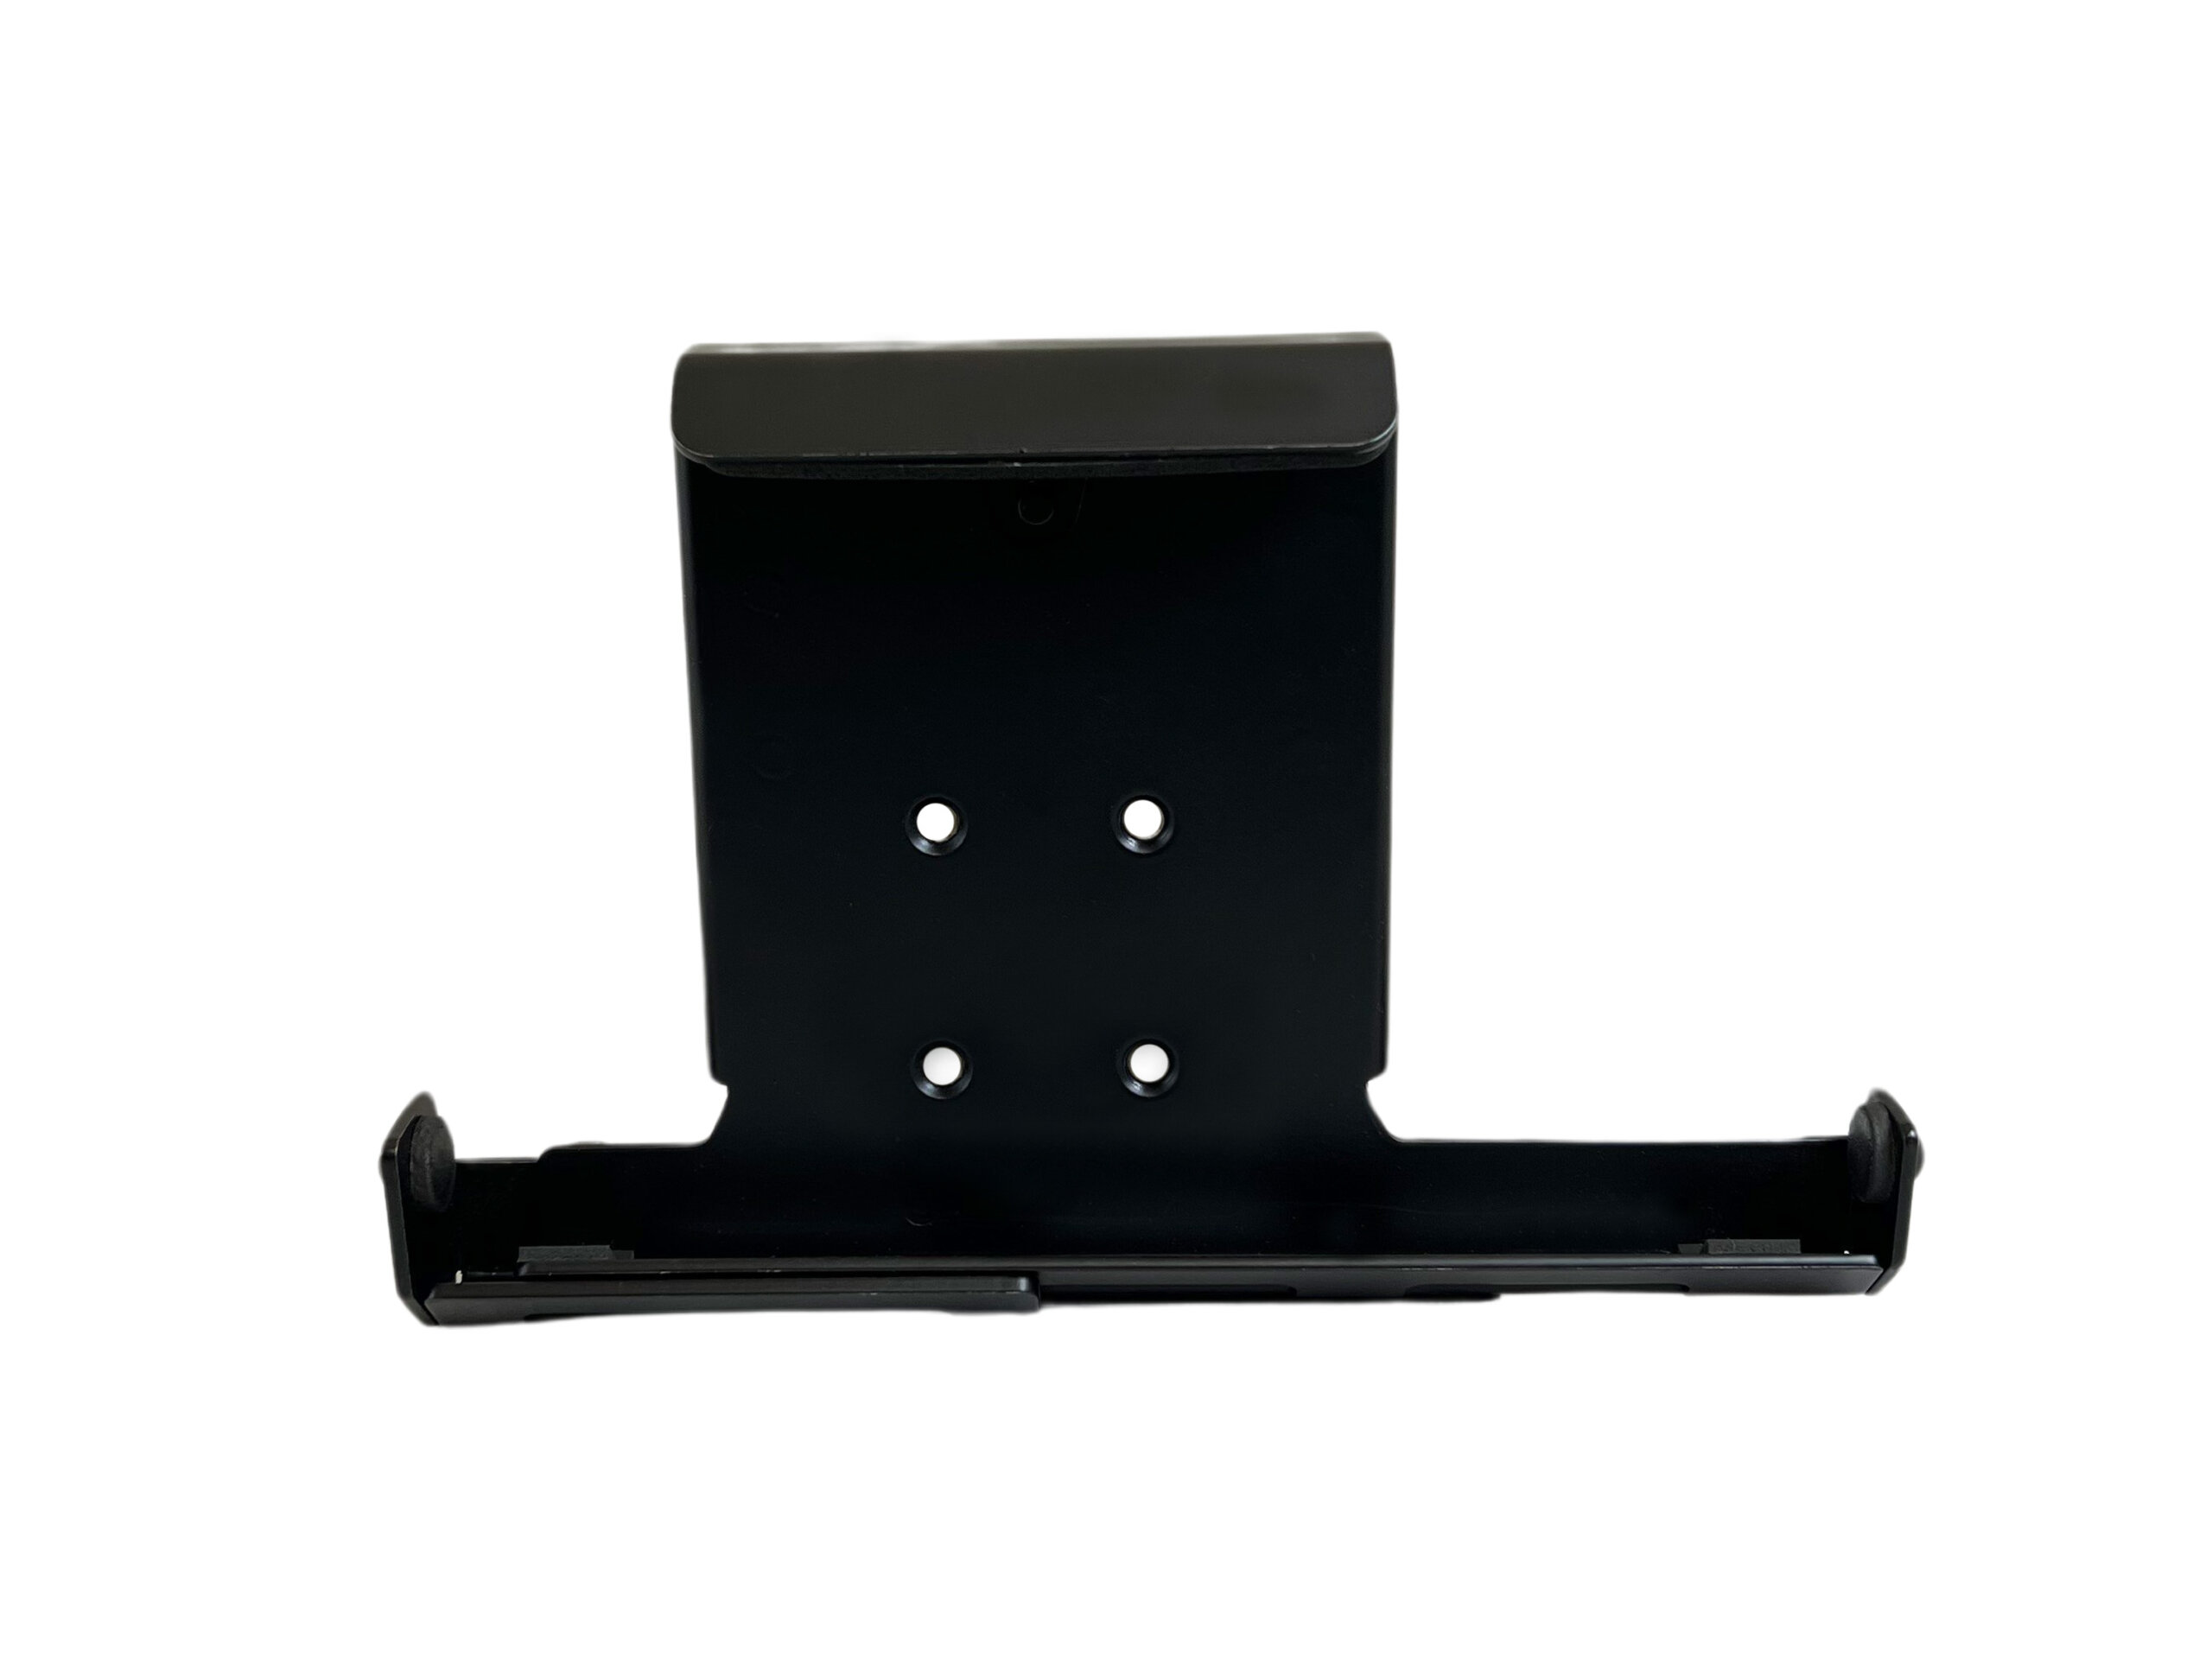 Universal Tablet Holder For Approximately 8″ to 11″ Wide Tablets